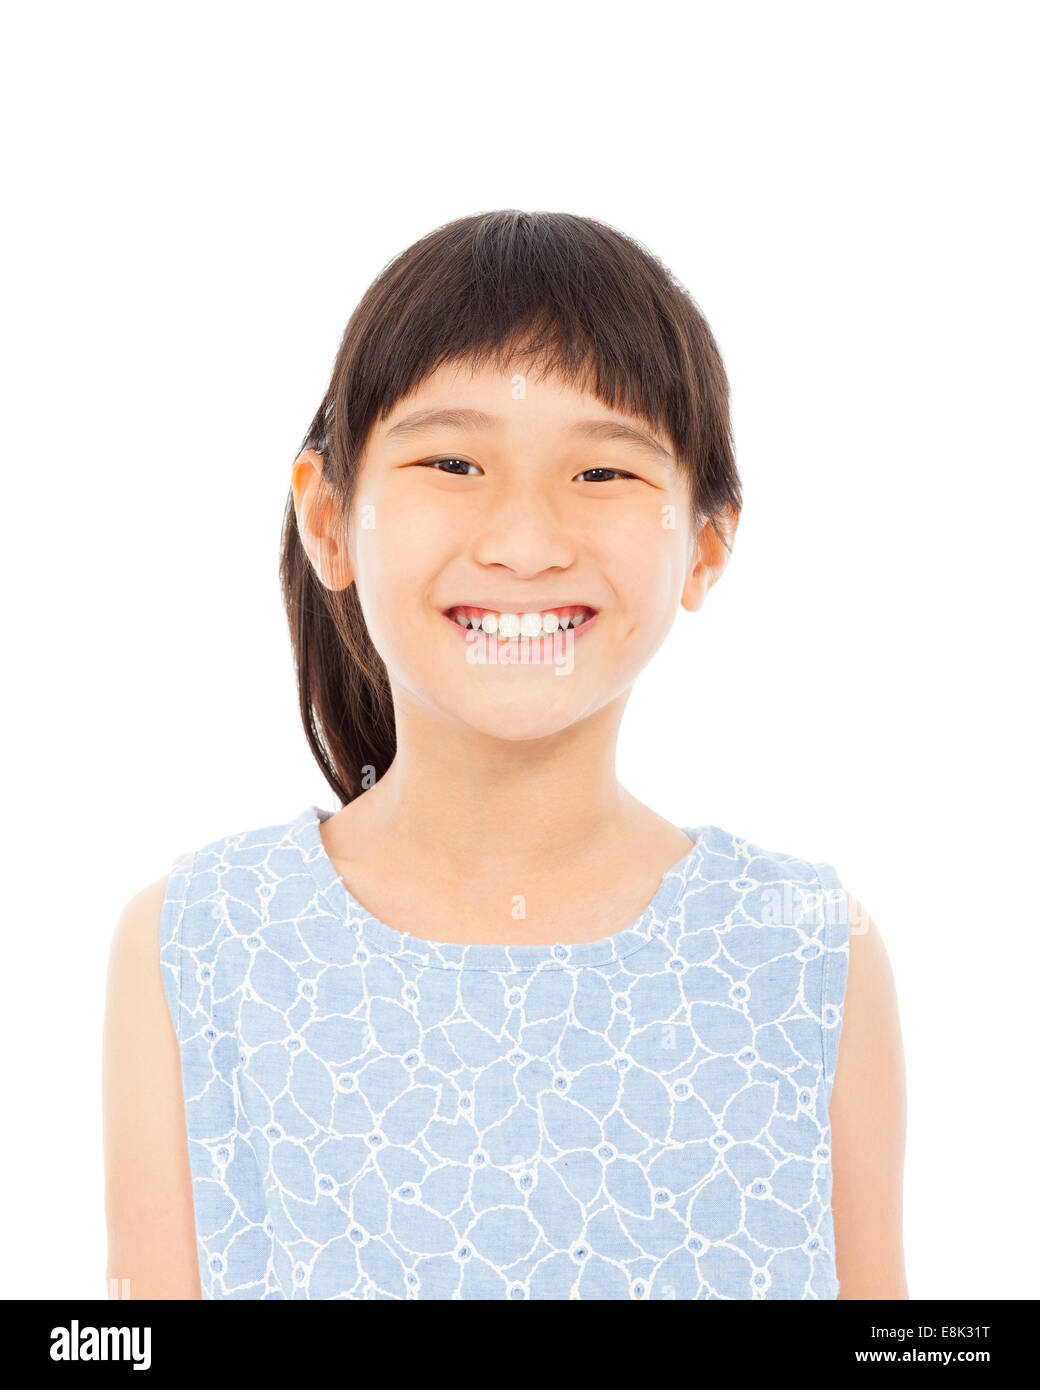 closeup of little girl happy facial expression over white background Stock Photo